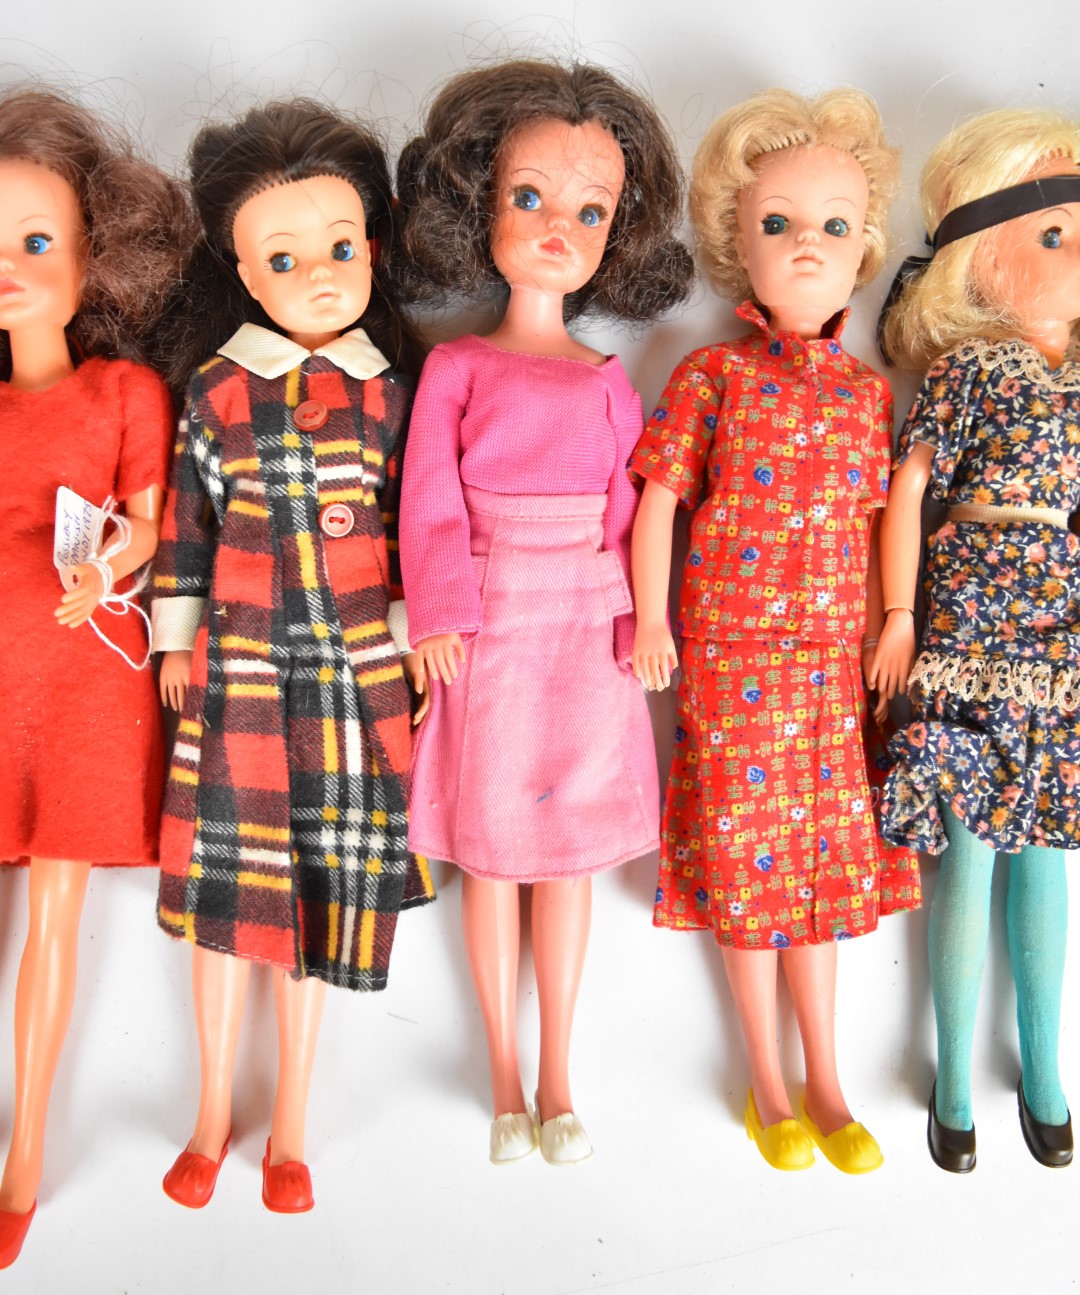 Ten vintage Sindy dolls by Pedigree dressed in original 1970's outfits. - Image 3 of 4